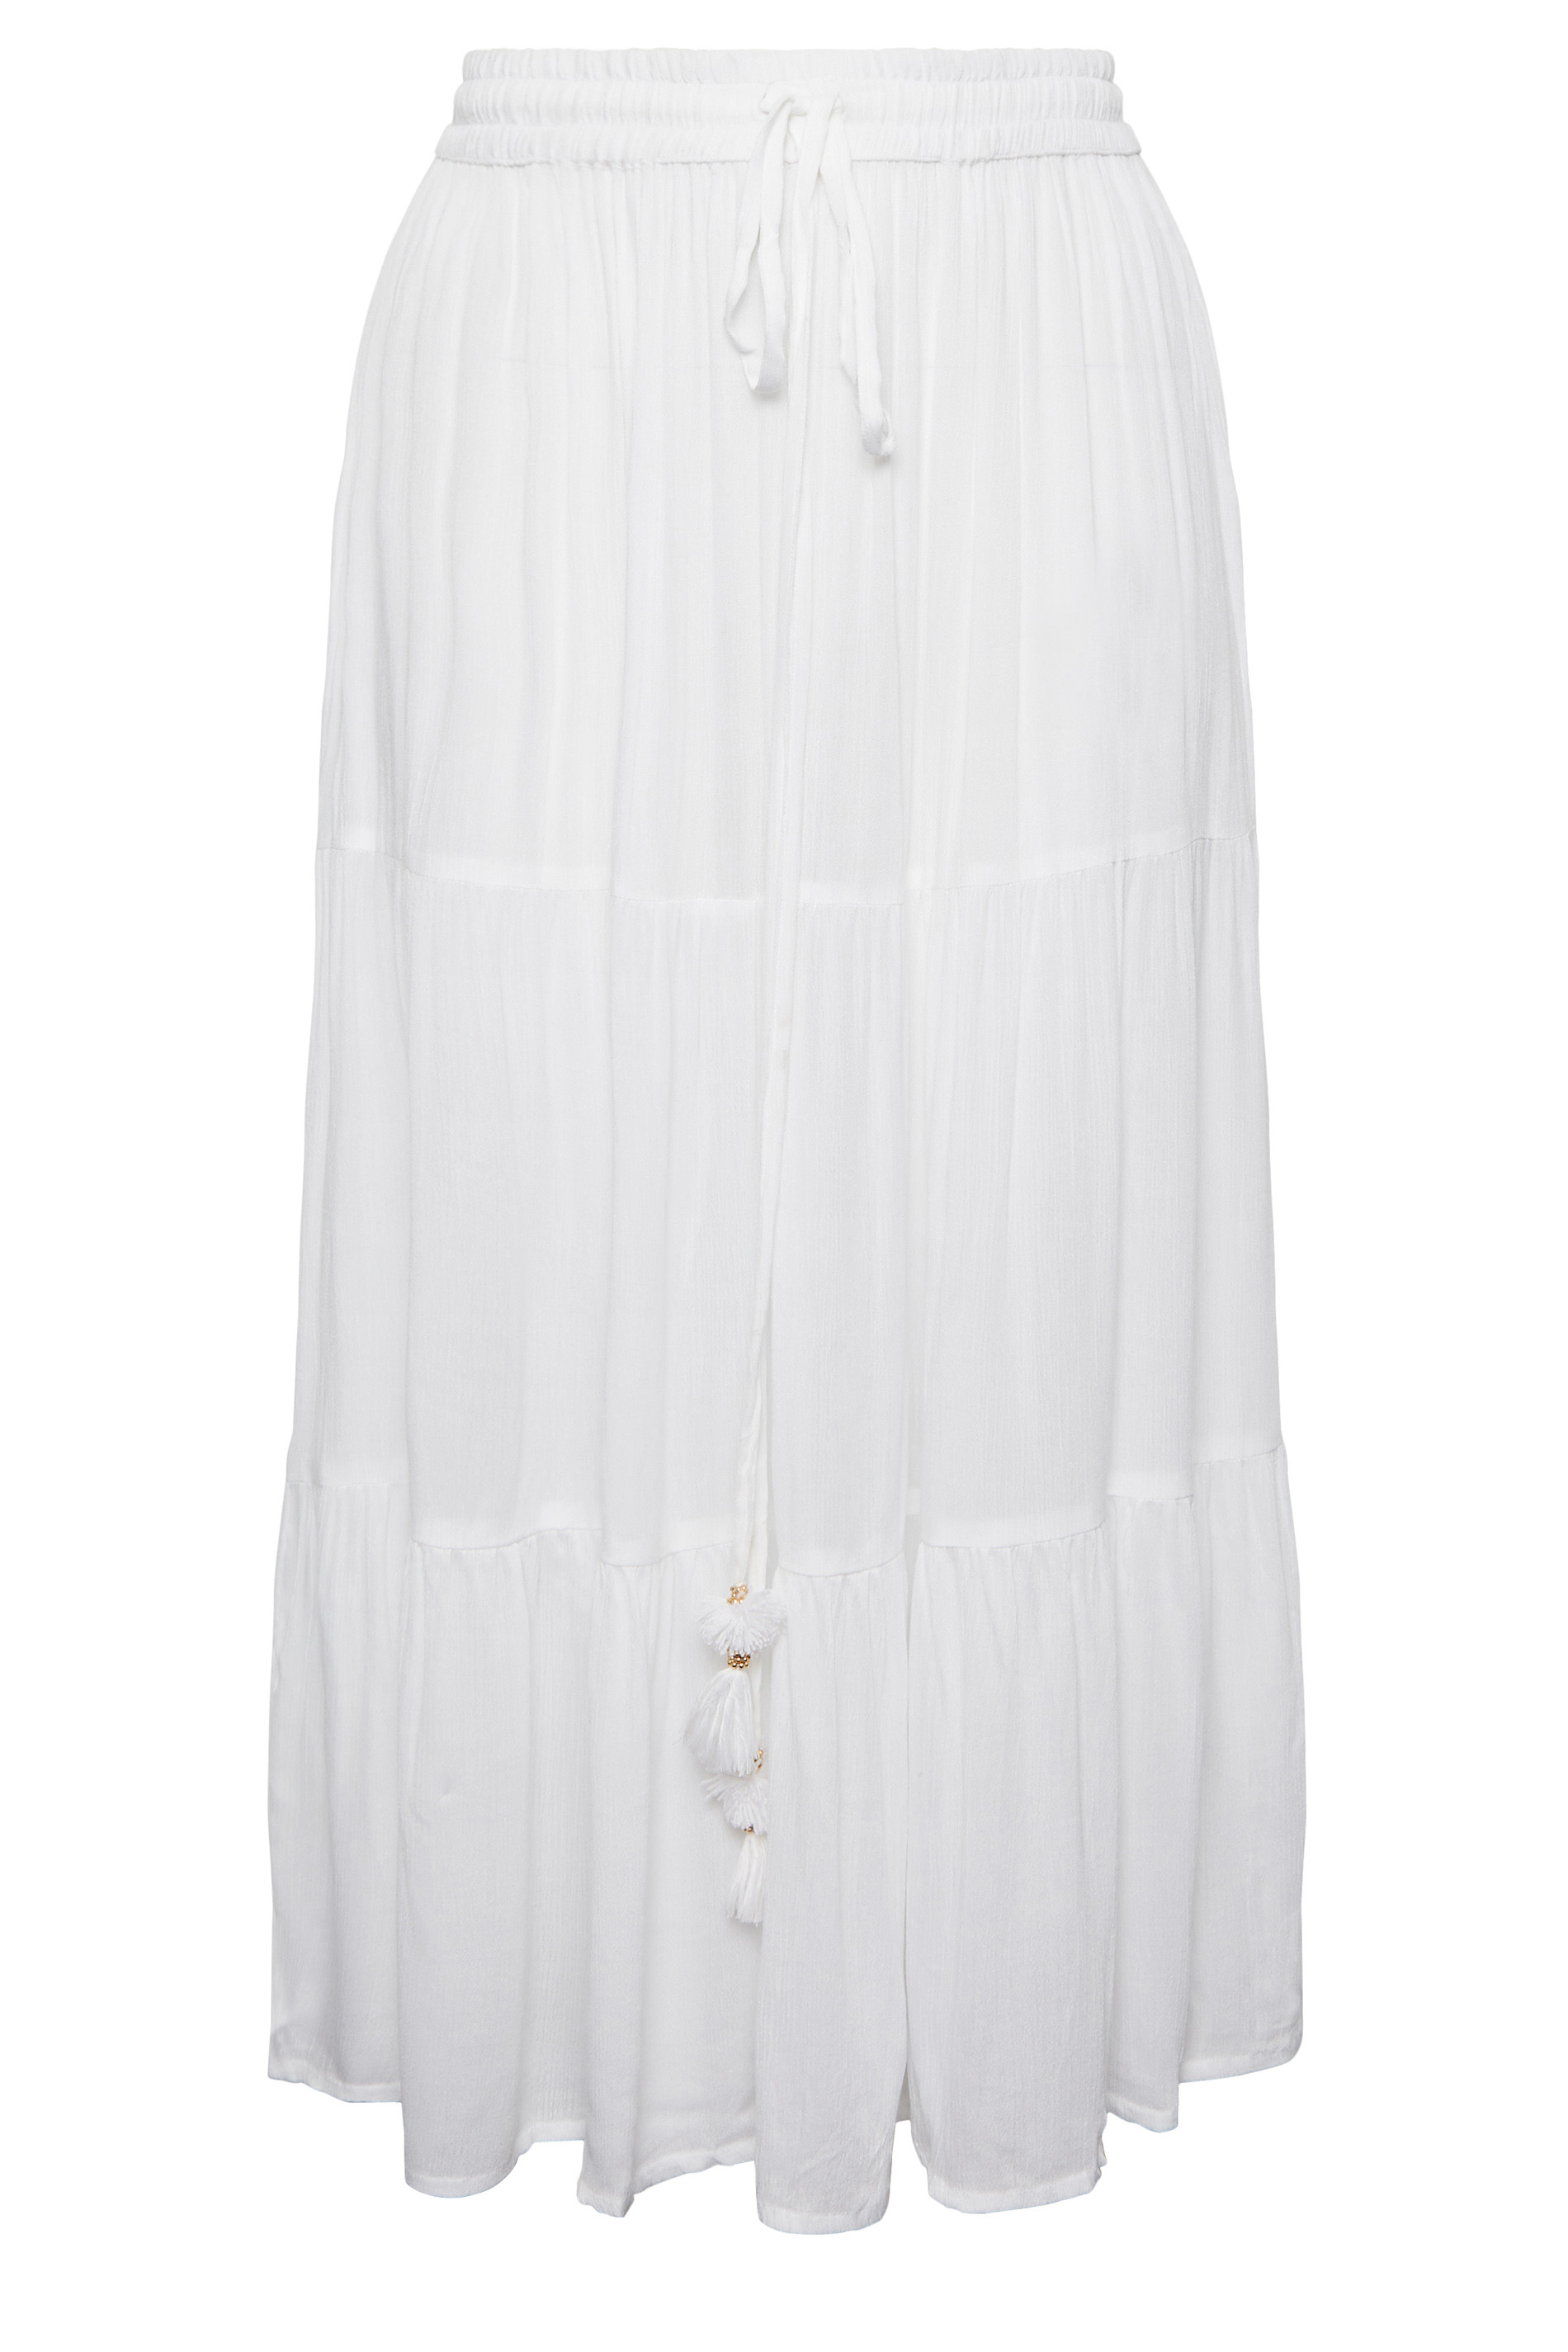 YOURS Curve Plus Size White Tiered Beach Skirt | Yours Clothing